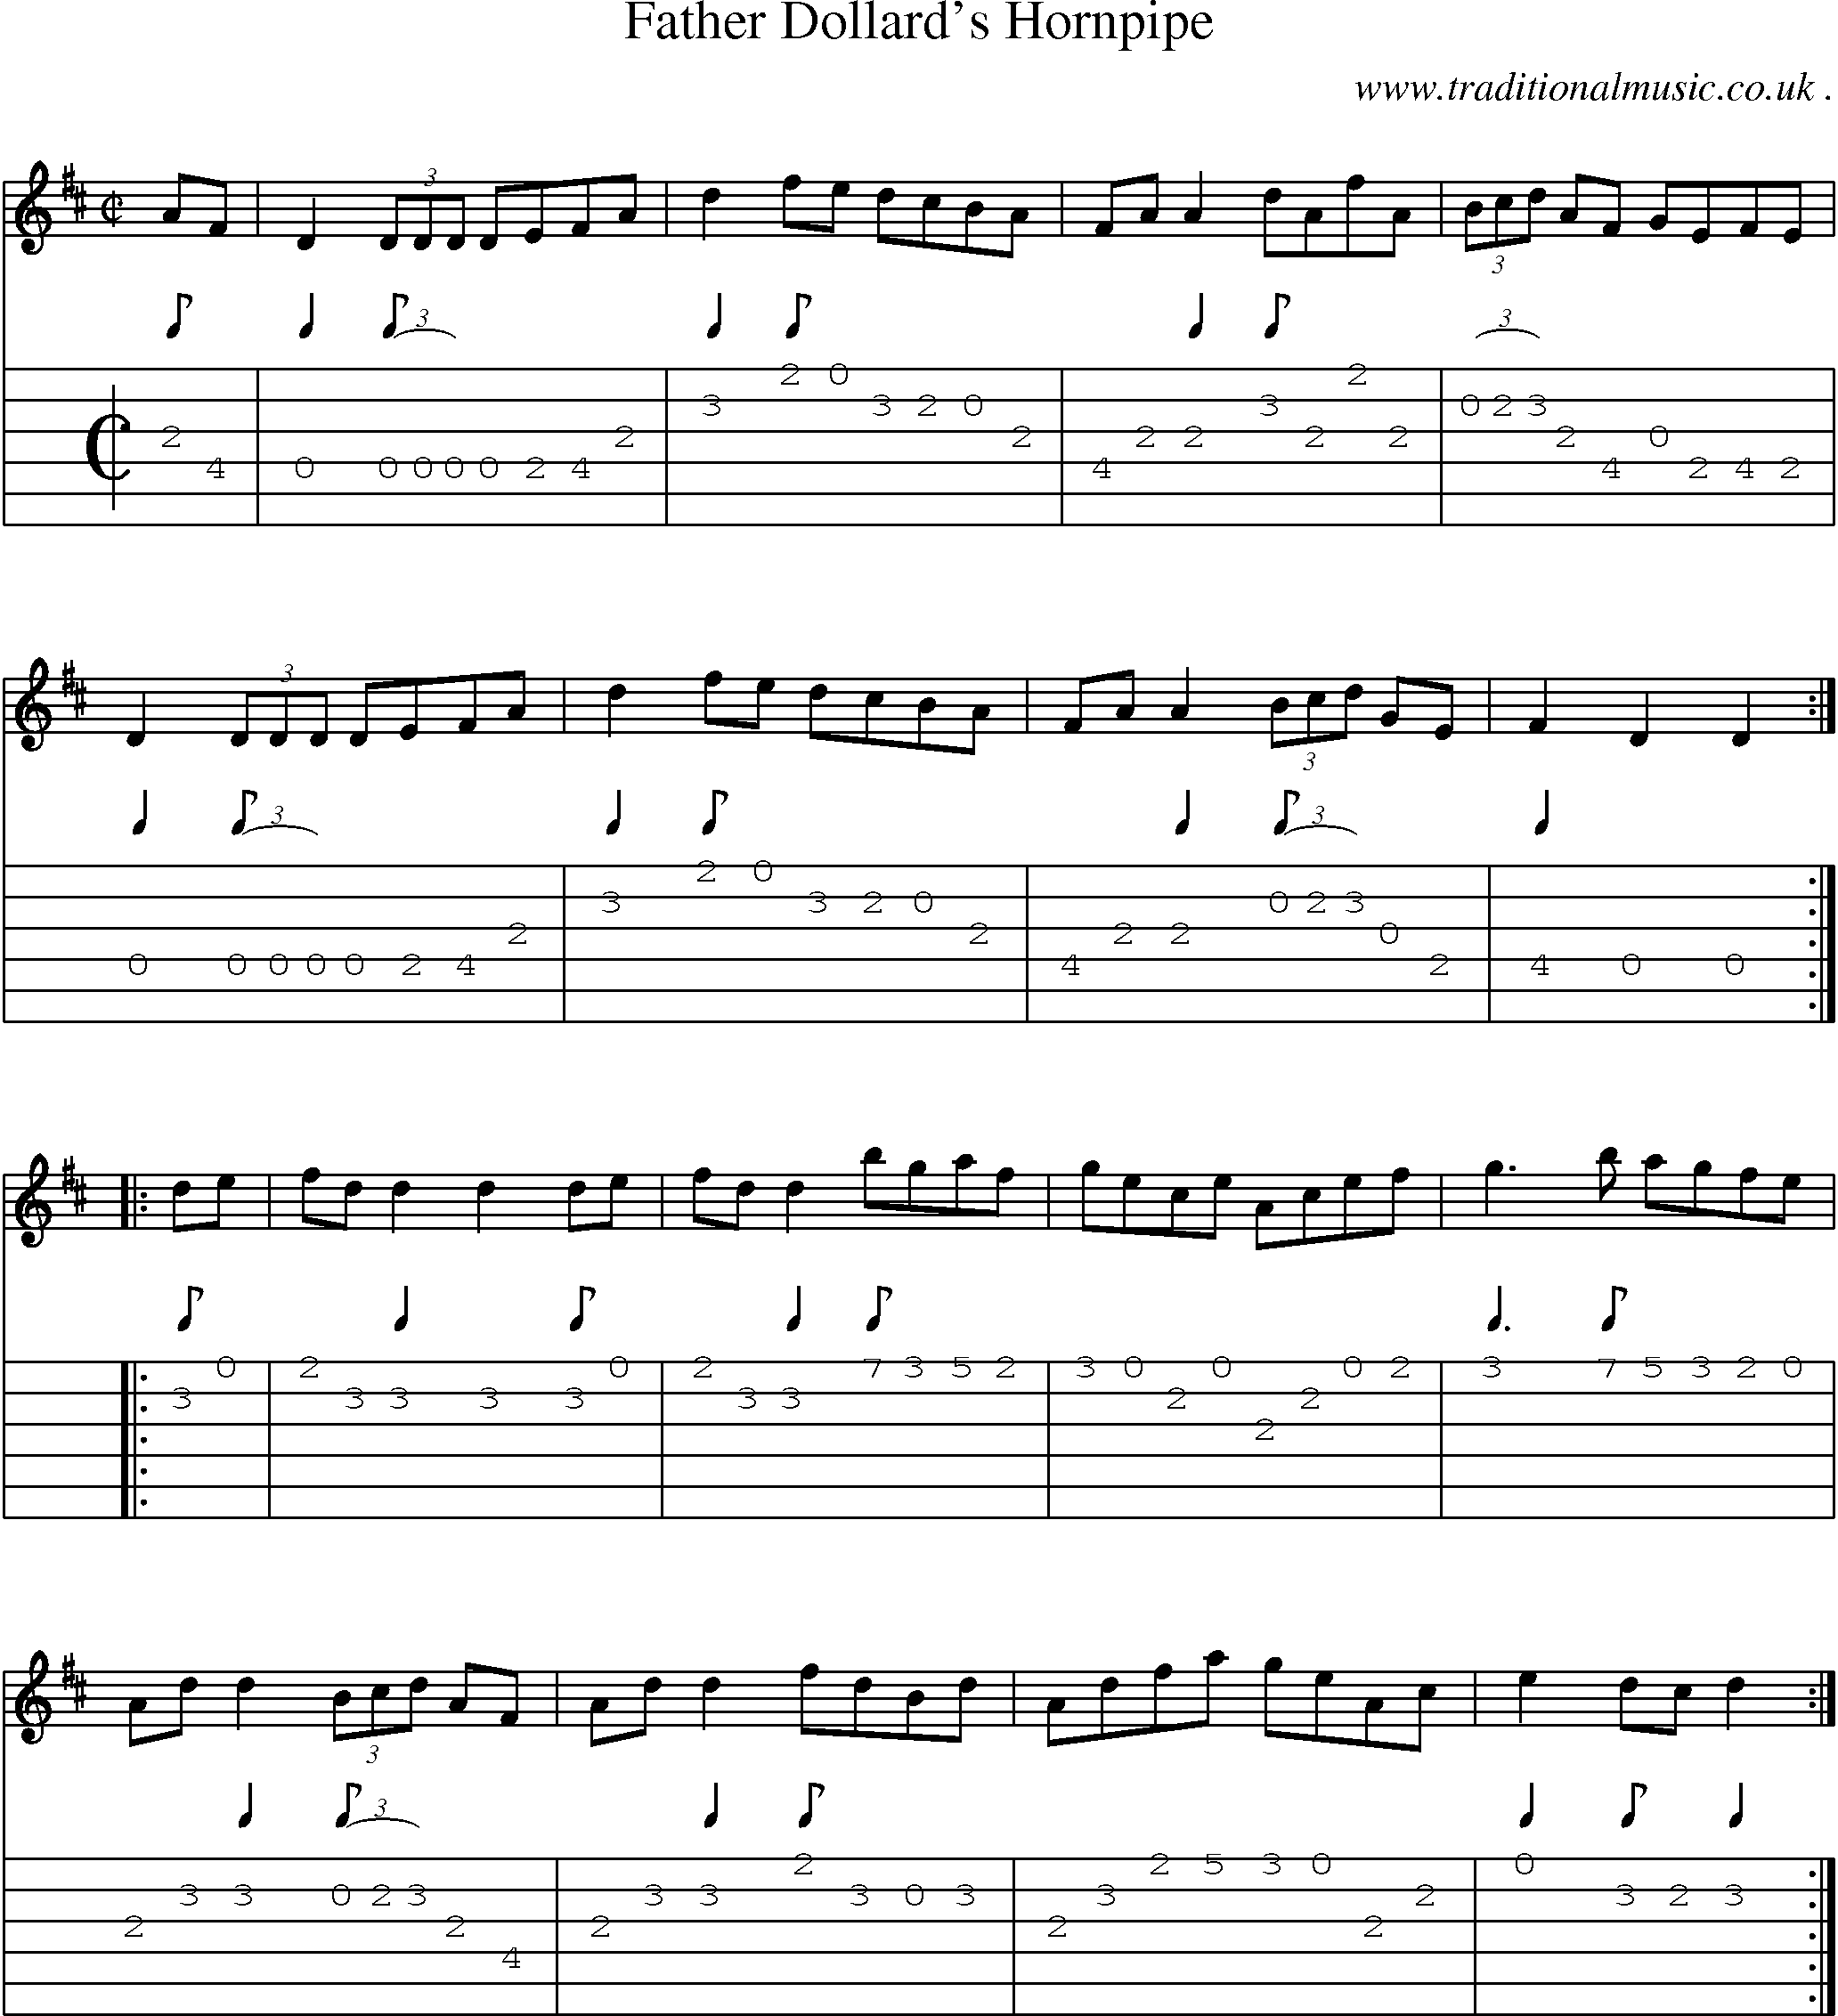 Sheet-Music and Guitar Tabs for Father Dollards Hornpipe